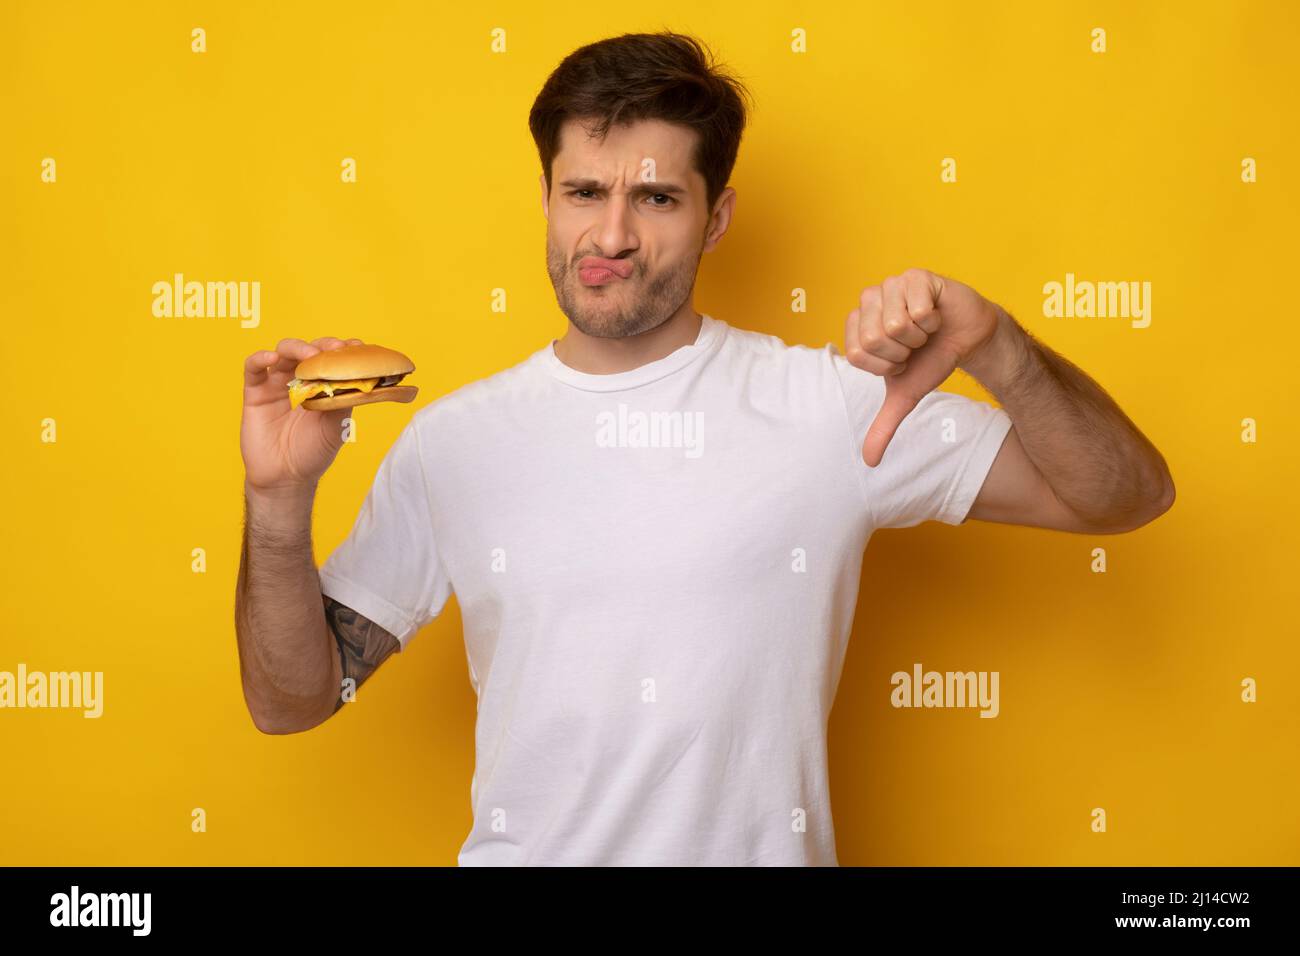 Angry Man Holding Burger Showing Thumbs Down Stock Photo